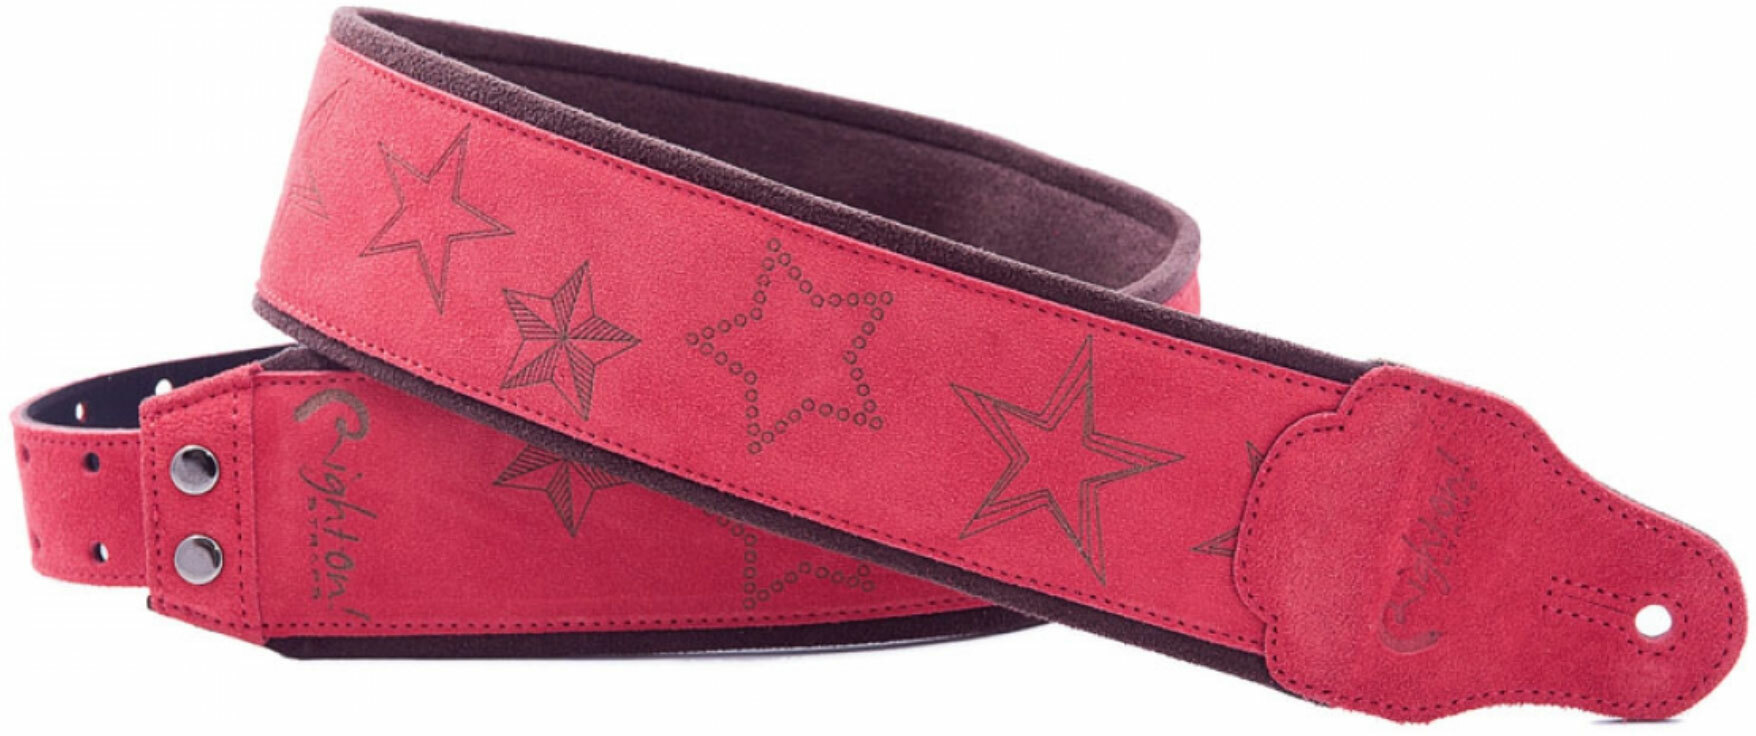 Righton Straps Jazz Stars Leather Guitar Strap Cuir 2.75inc Red - Sangle Courroie - Main picture